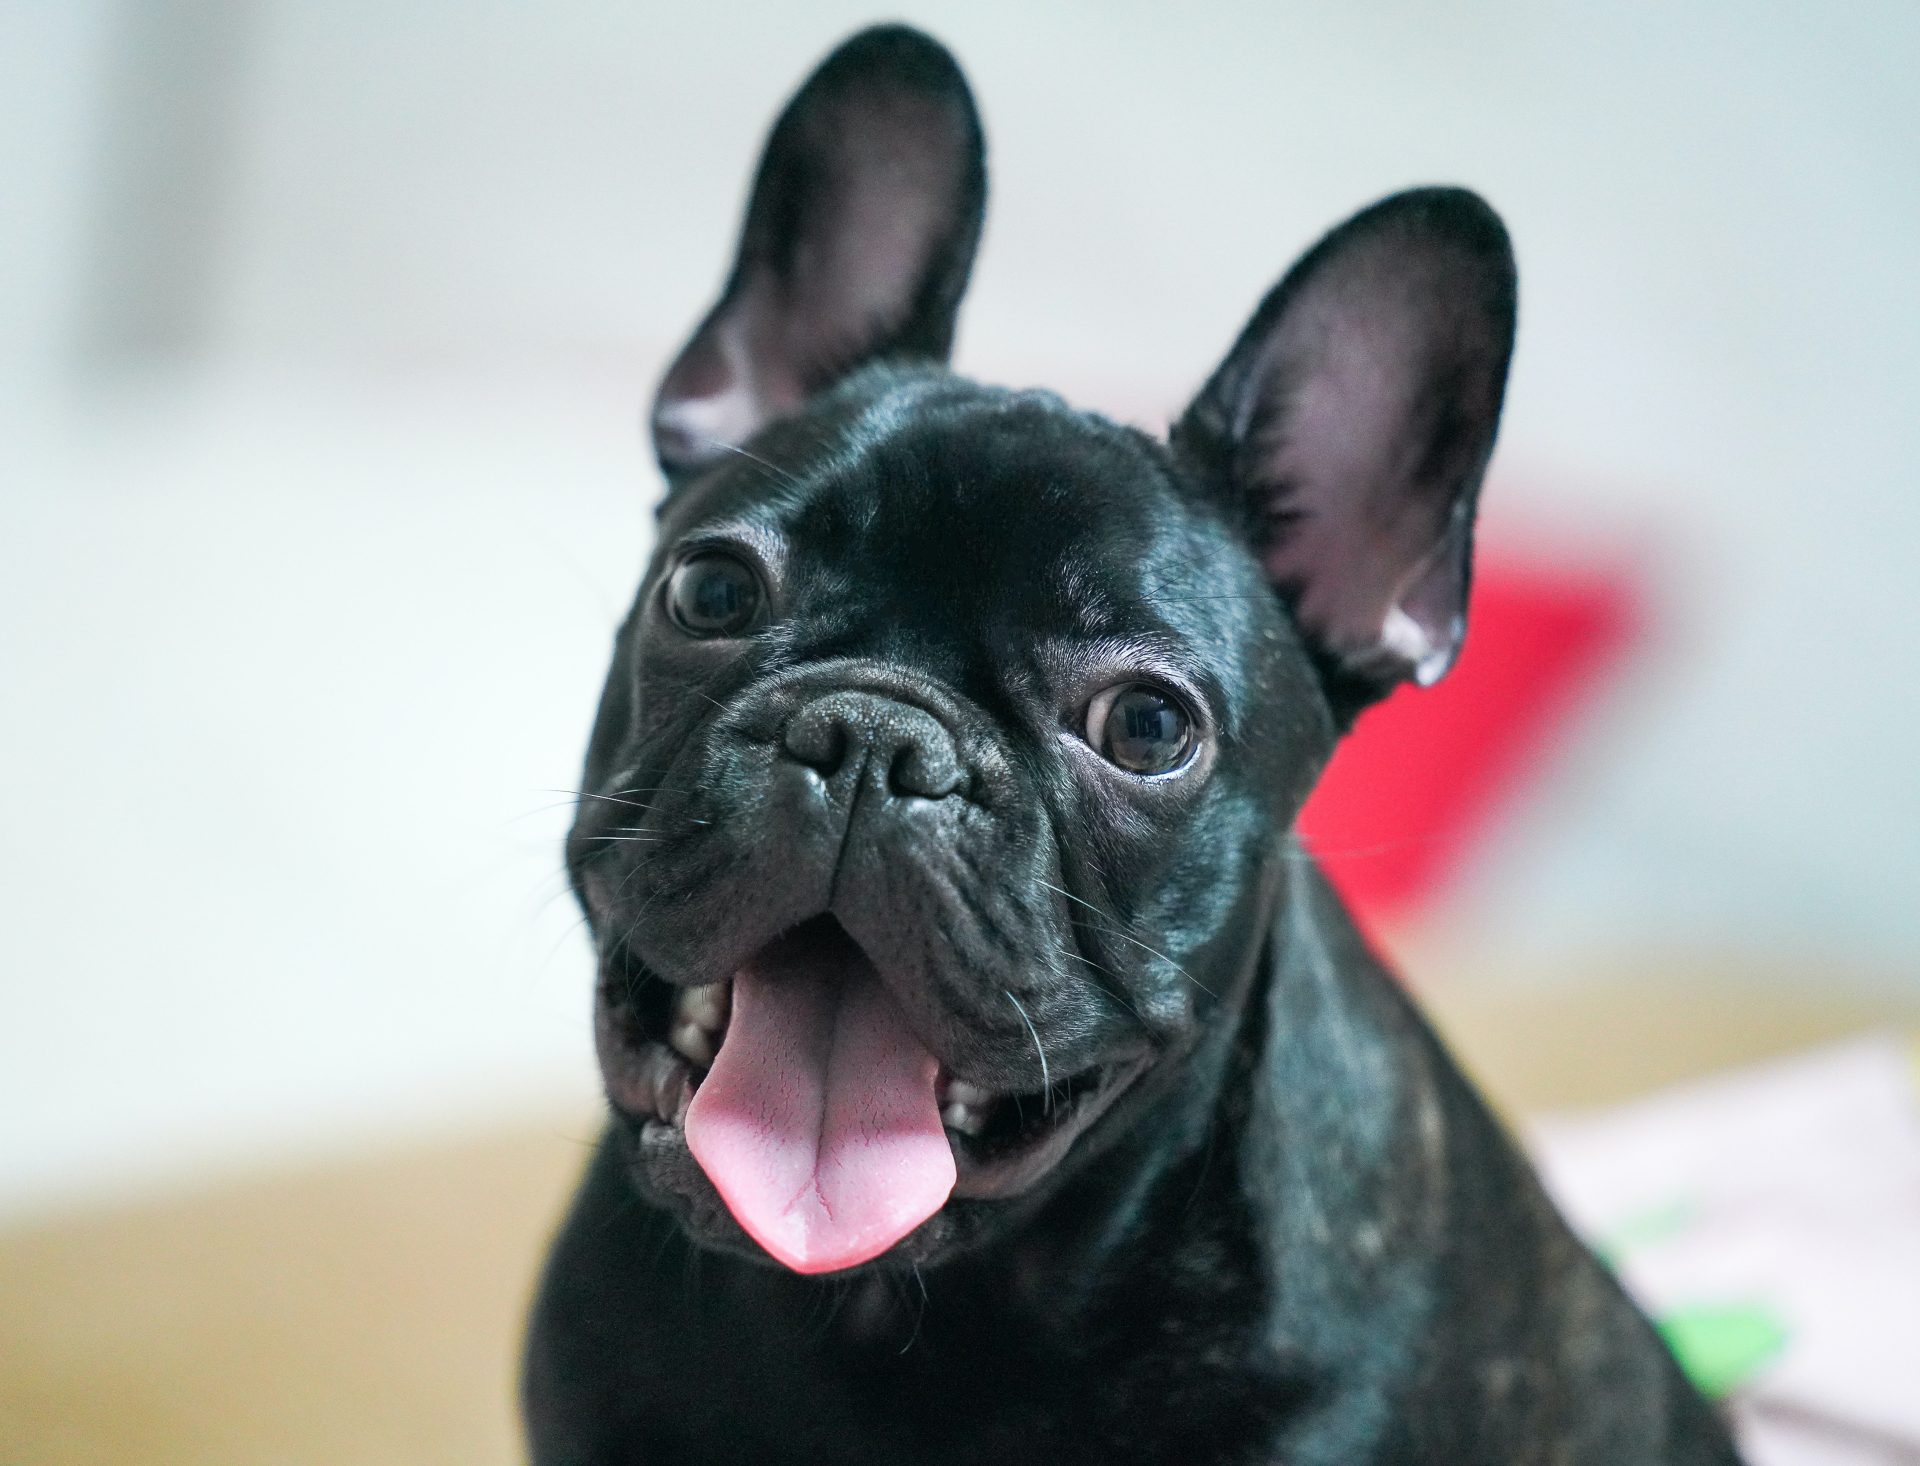 French Bulldog grooming made easy: Tips and tricks for keeping your pup looking great.